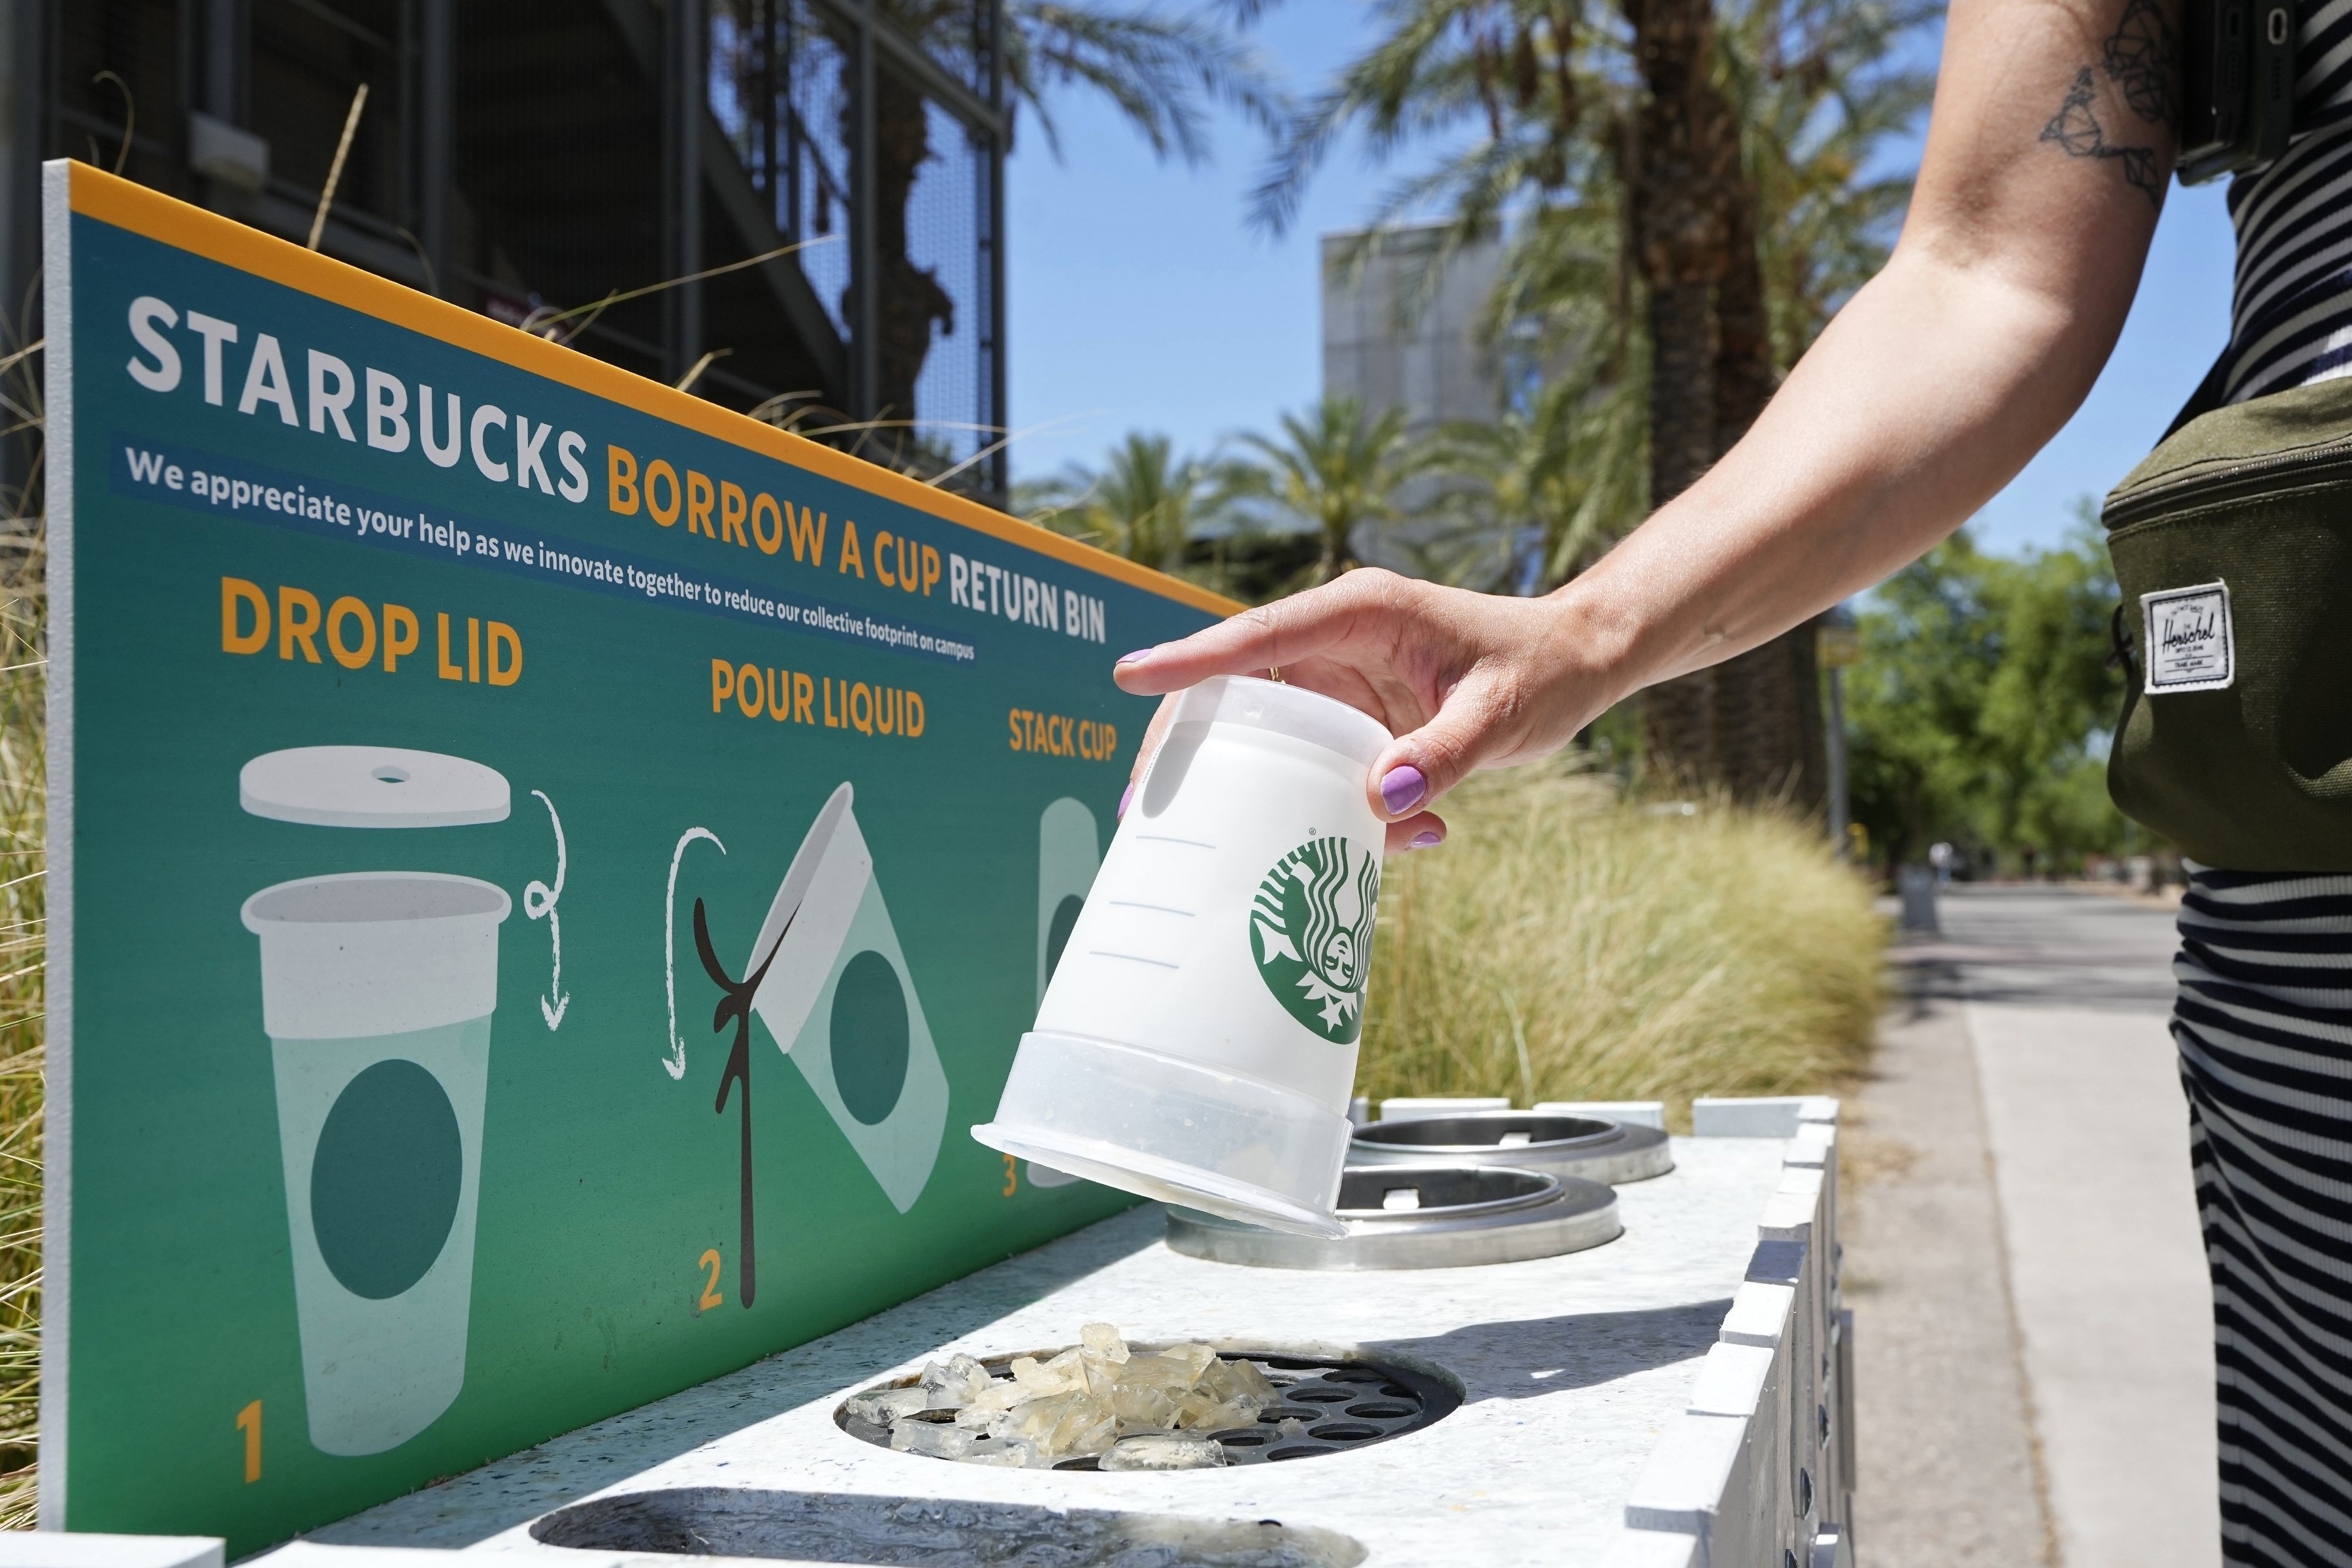 Starbucks Wants to Overhaul Its Iconic Cup in a Move Toward Sustainability